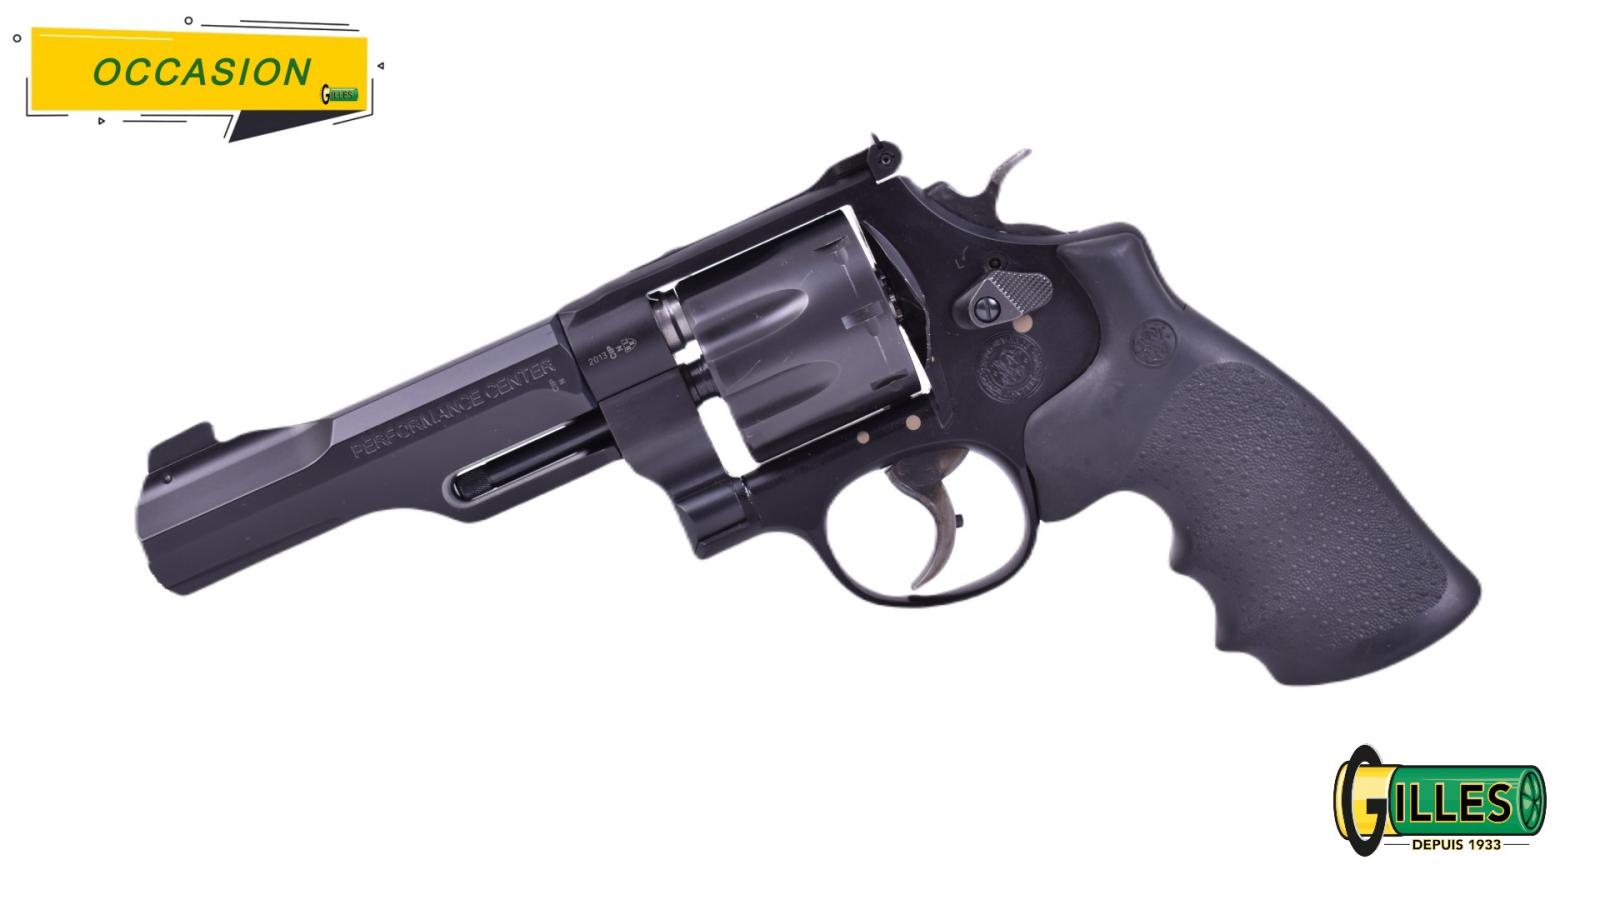 OCCASION SMITH & WESSON 327 TRR8 PERFORMANCE CENTER Cal. 357mag